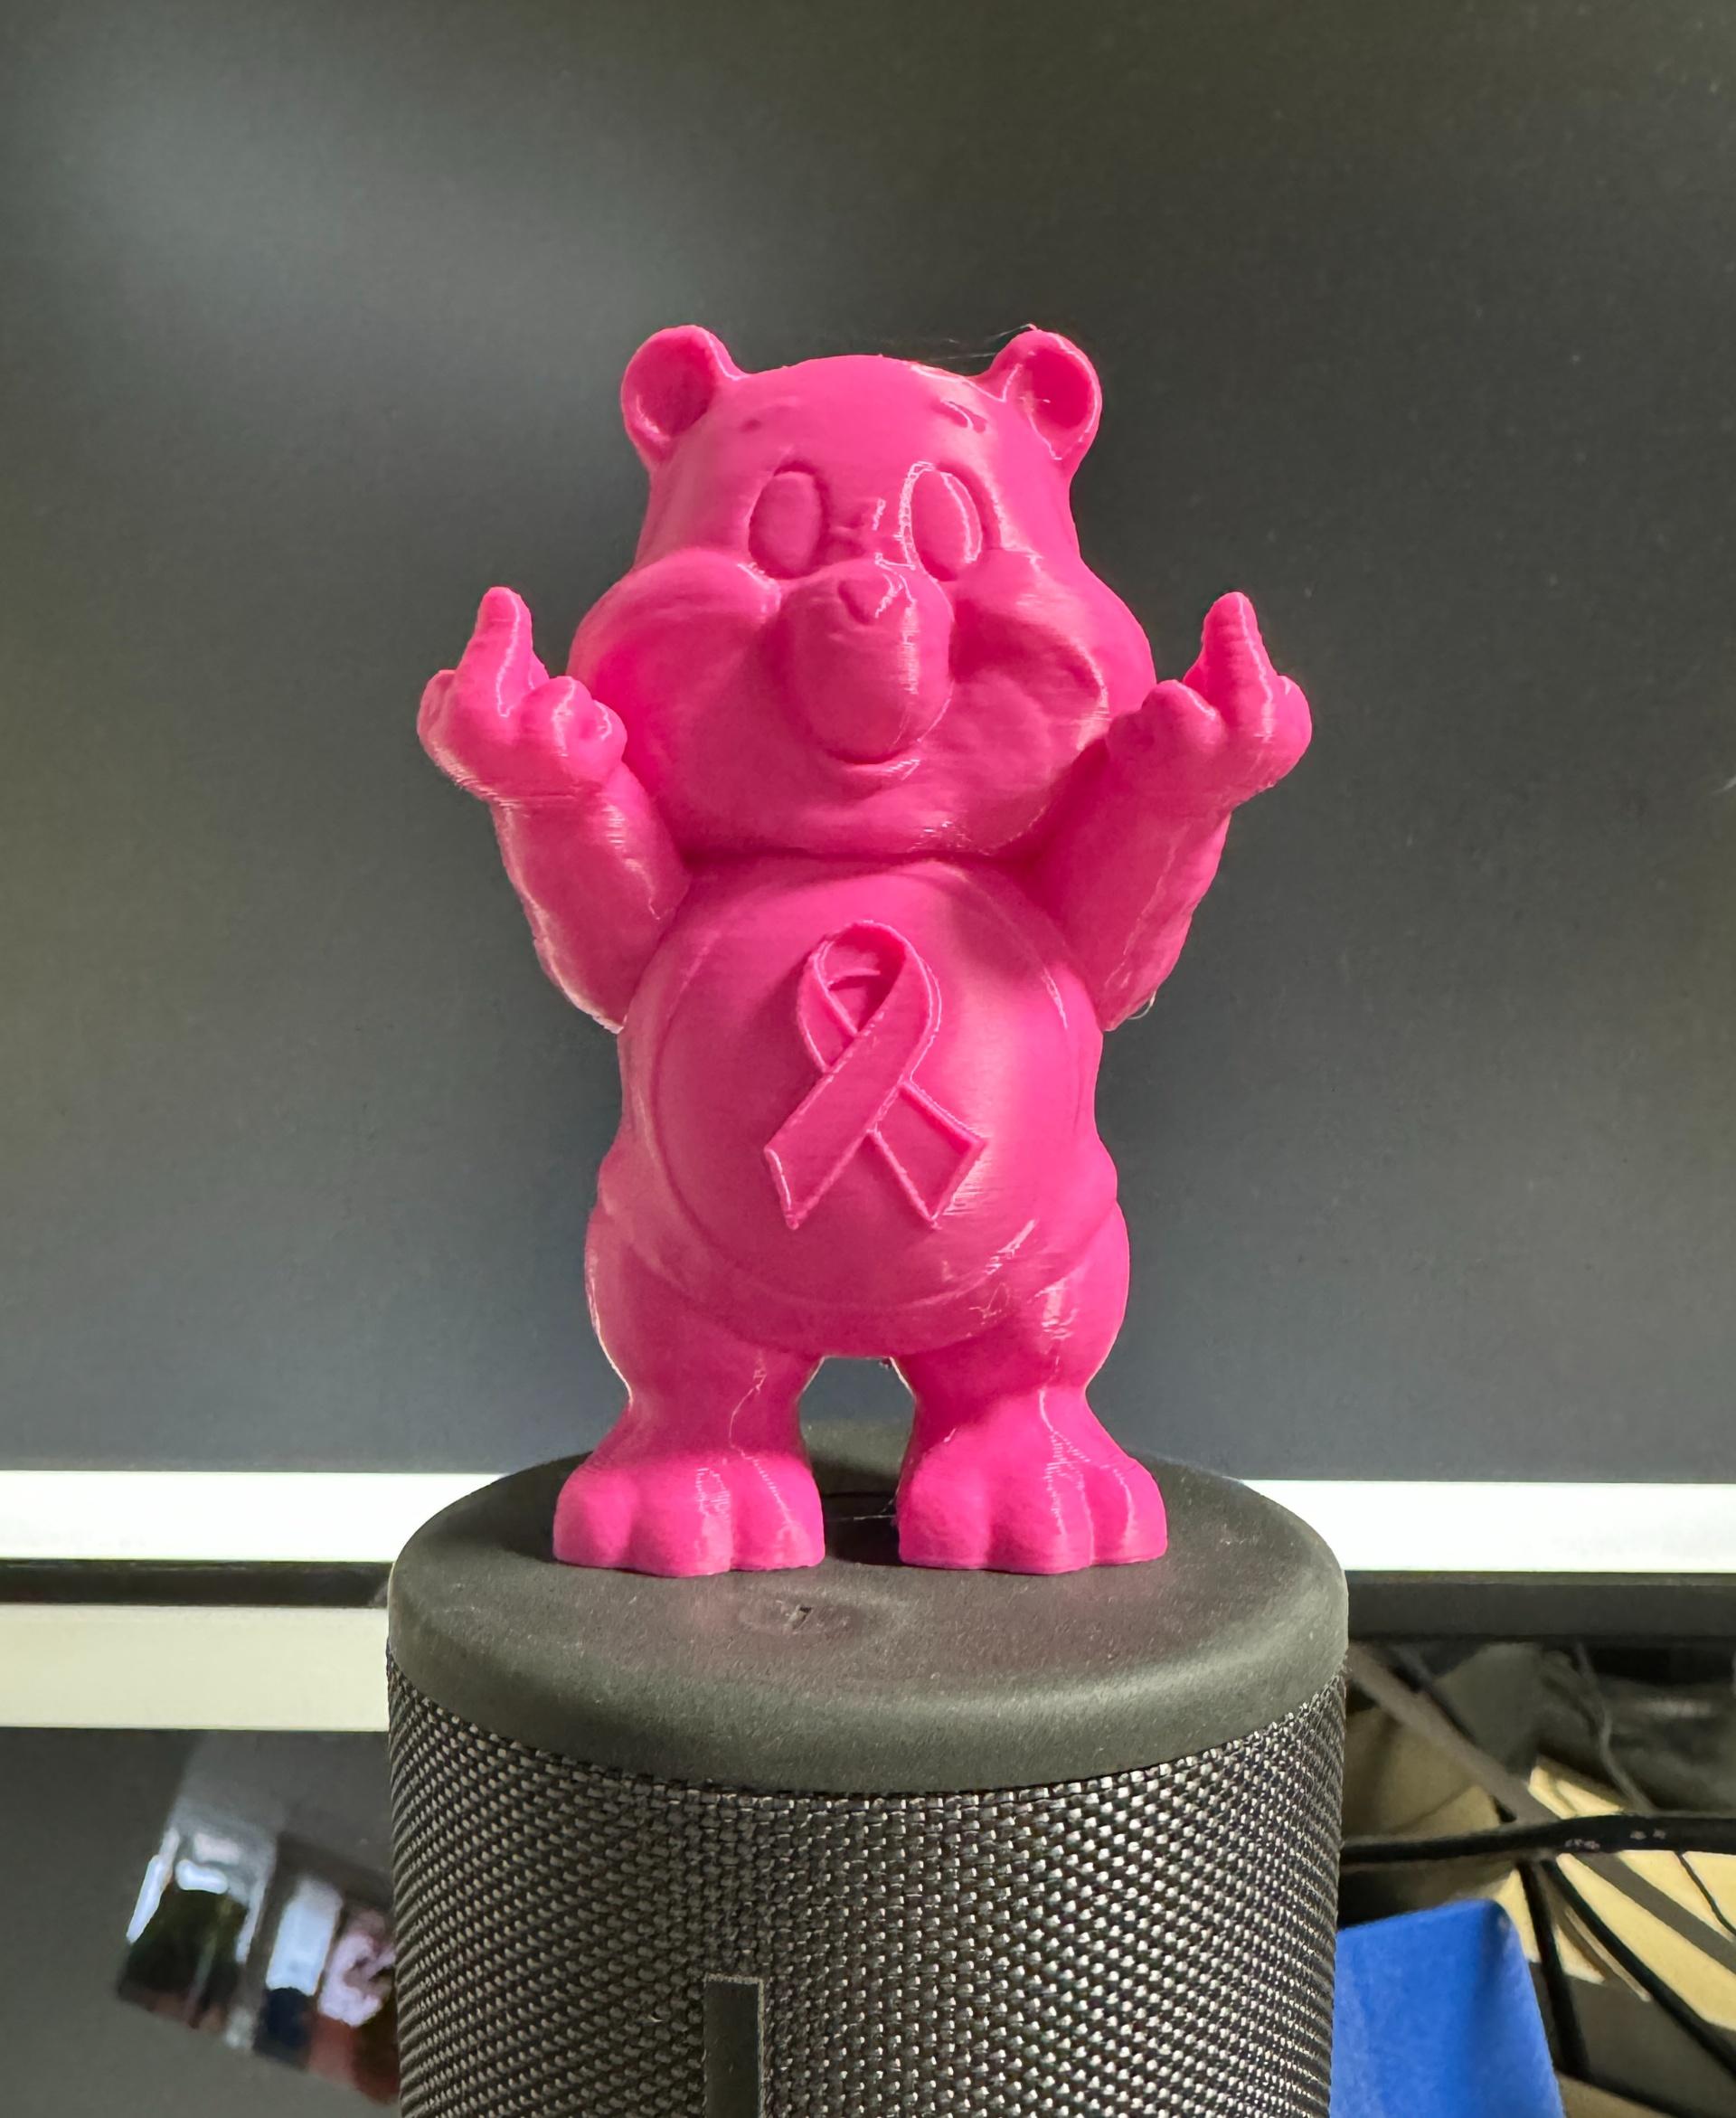 F - Bambu P1S, Bambu Basic PLA - Magenta
This is an awesome bear! Just printed one for my mom. - 3d model